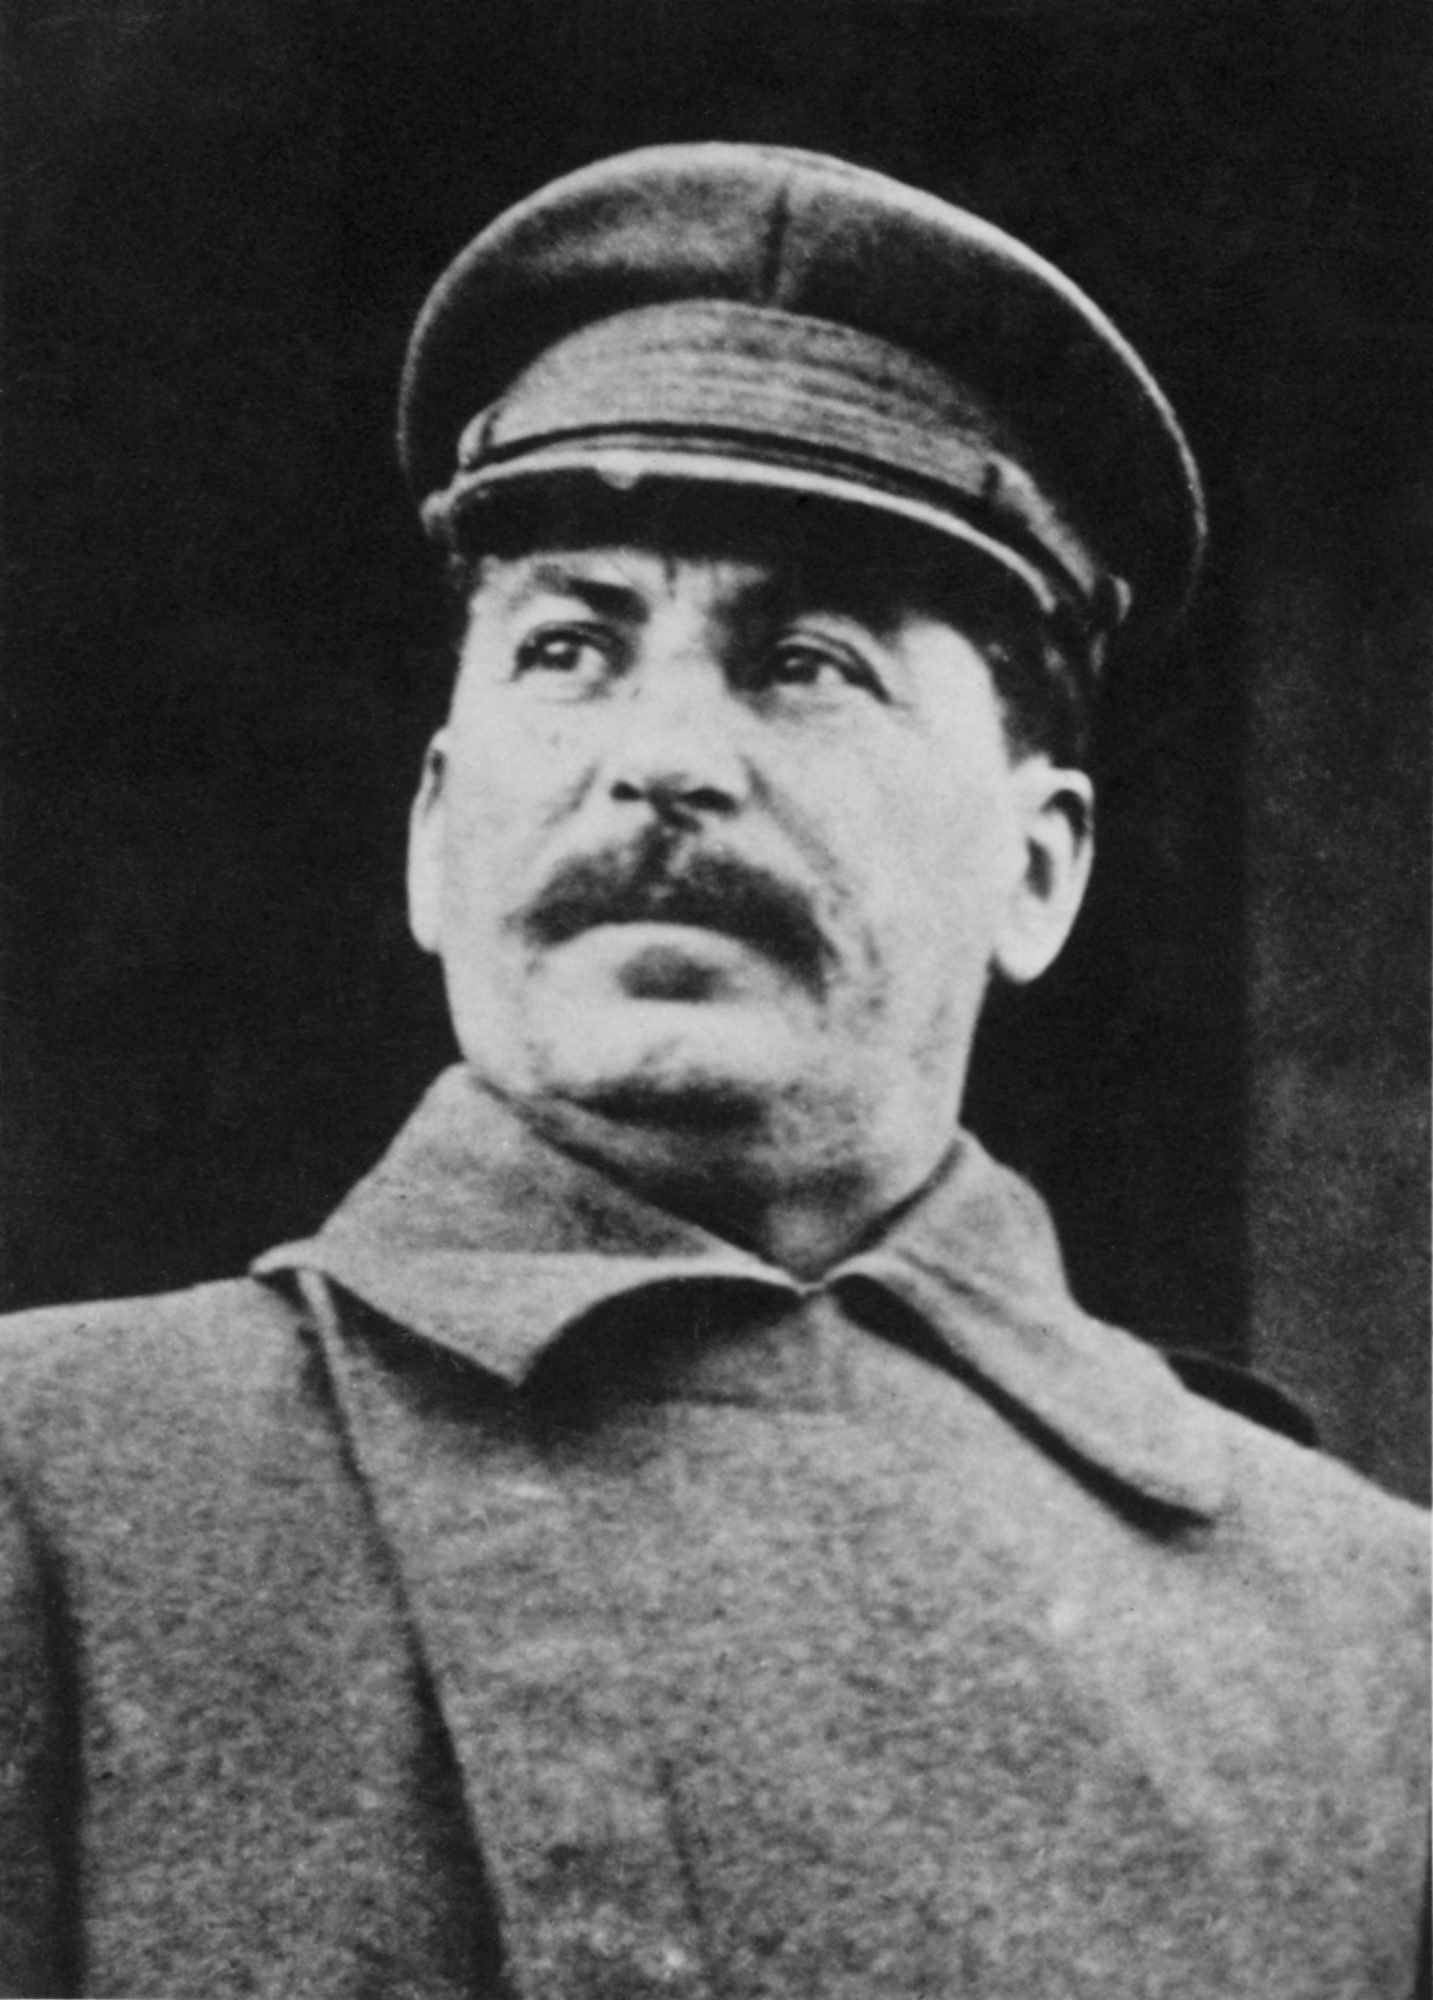 Joseph Stalin (1879 - 1953), General Secretary of the Communist Party of the Soviet Union, circa 1930. (Photo by Keystone/Hulton Archive/Getty Images)